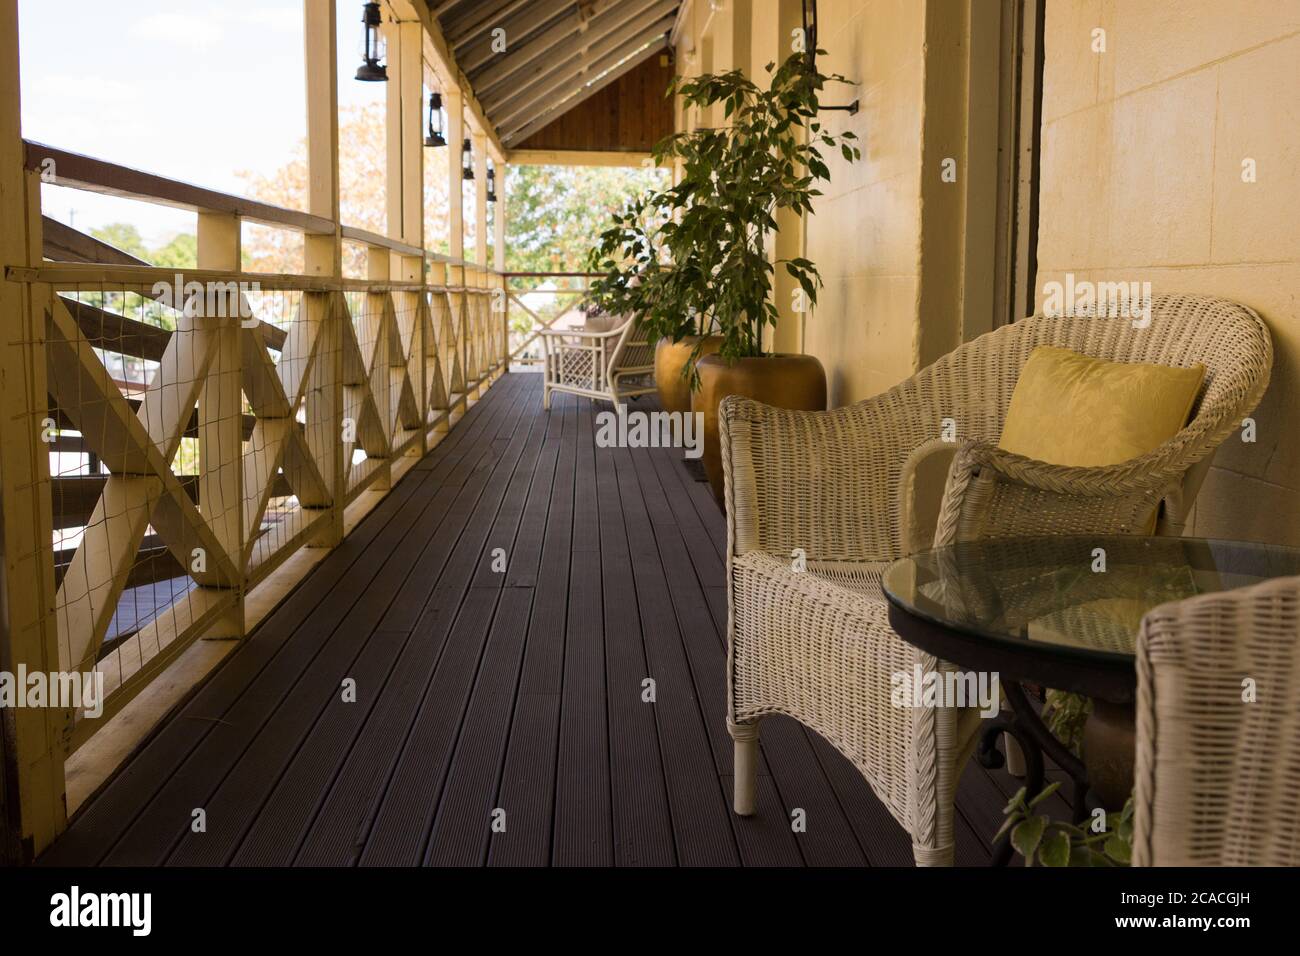 Cane chairs and table on timber verandah of Queenslander style house, Australia Stock Photo